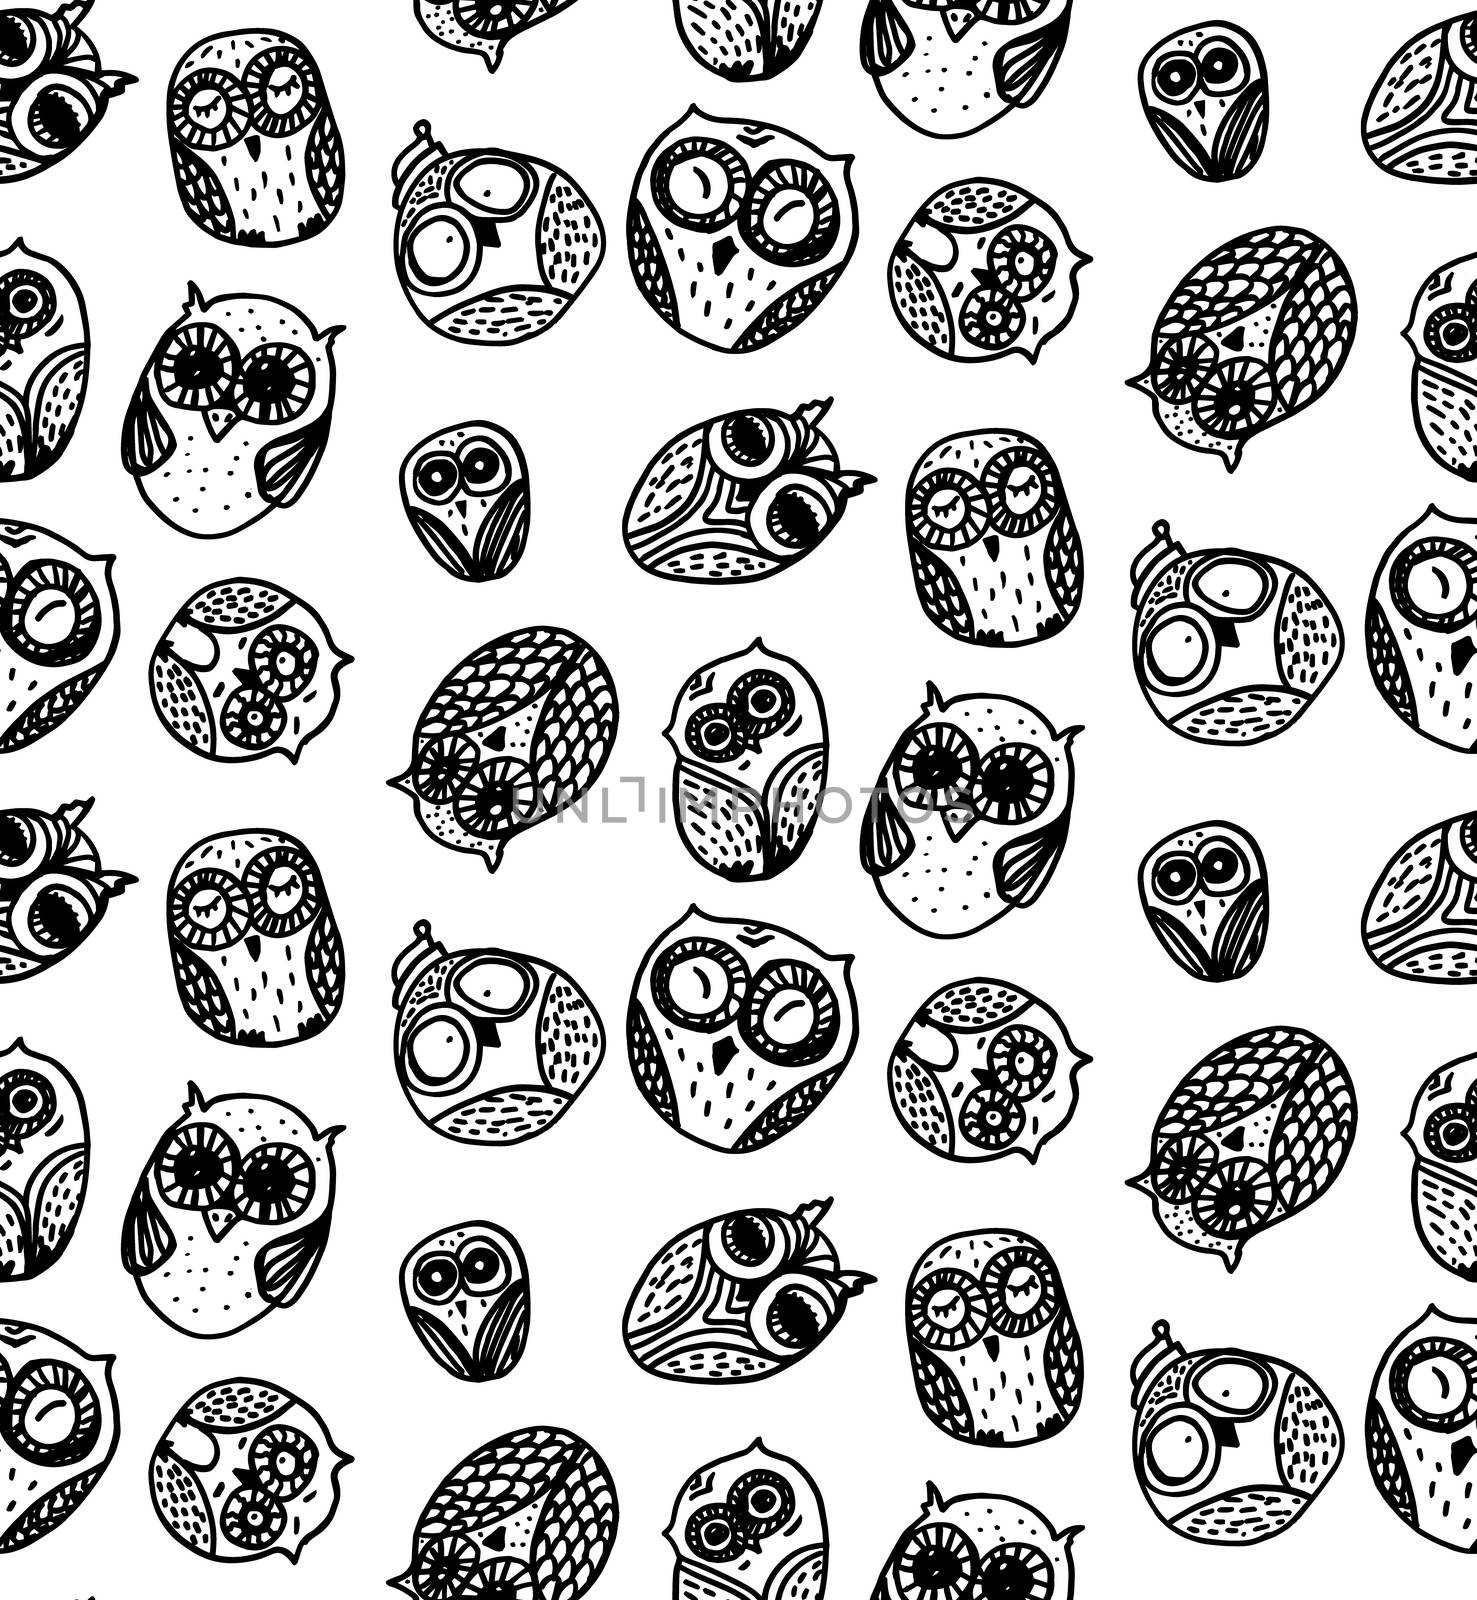 Hand Drawn Funny Owl. Owls seamless pattern for print, fabric, wrap, illustration. Vector